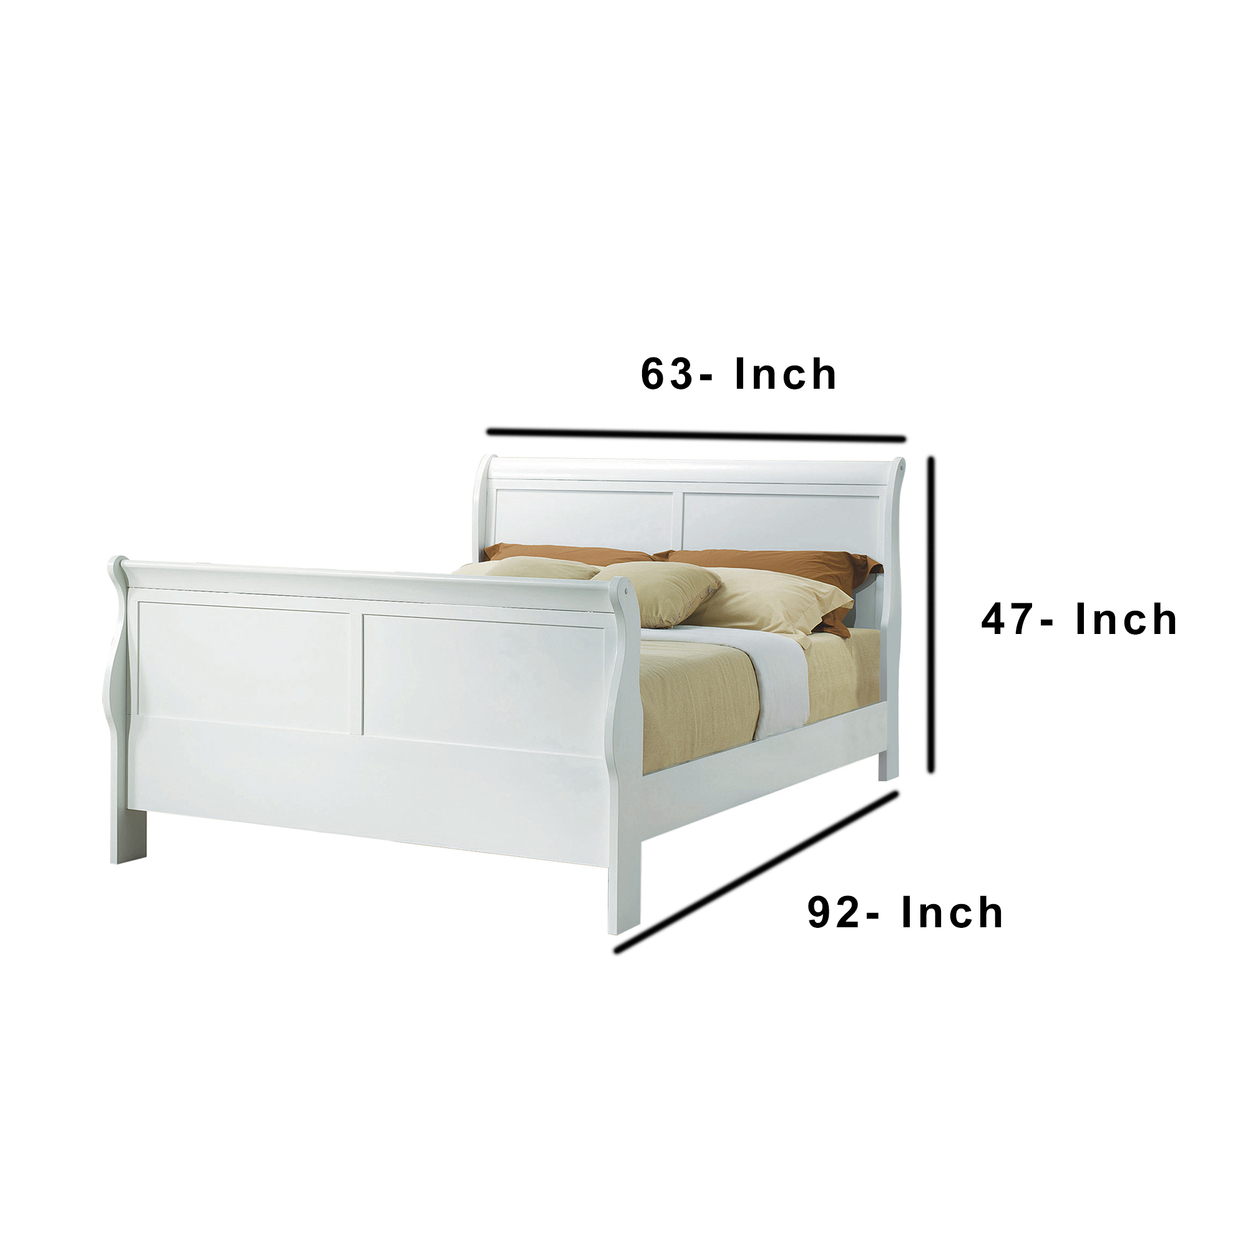 Classy Transitional Style Queen Size Sleigh Bed, White- Saltoro Sherpi